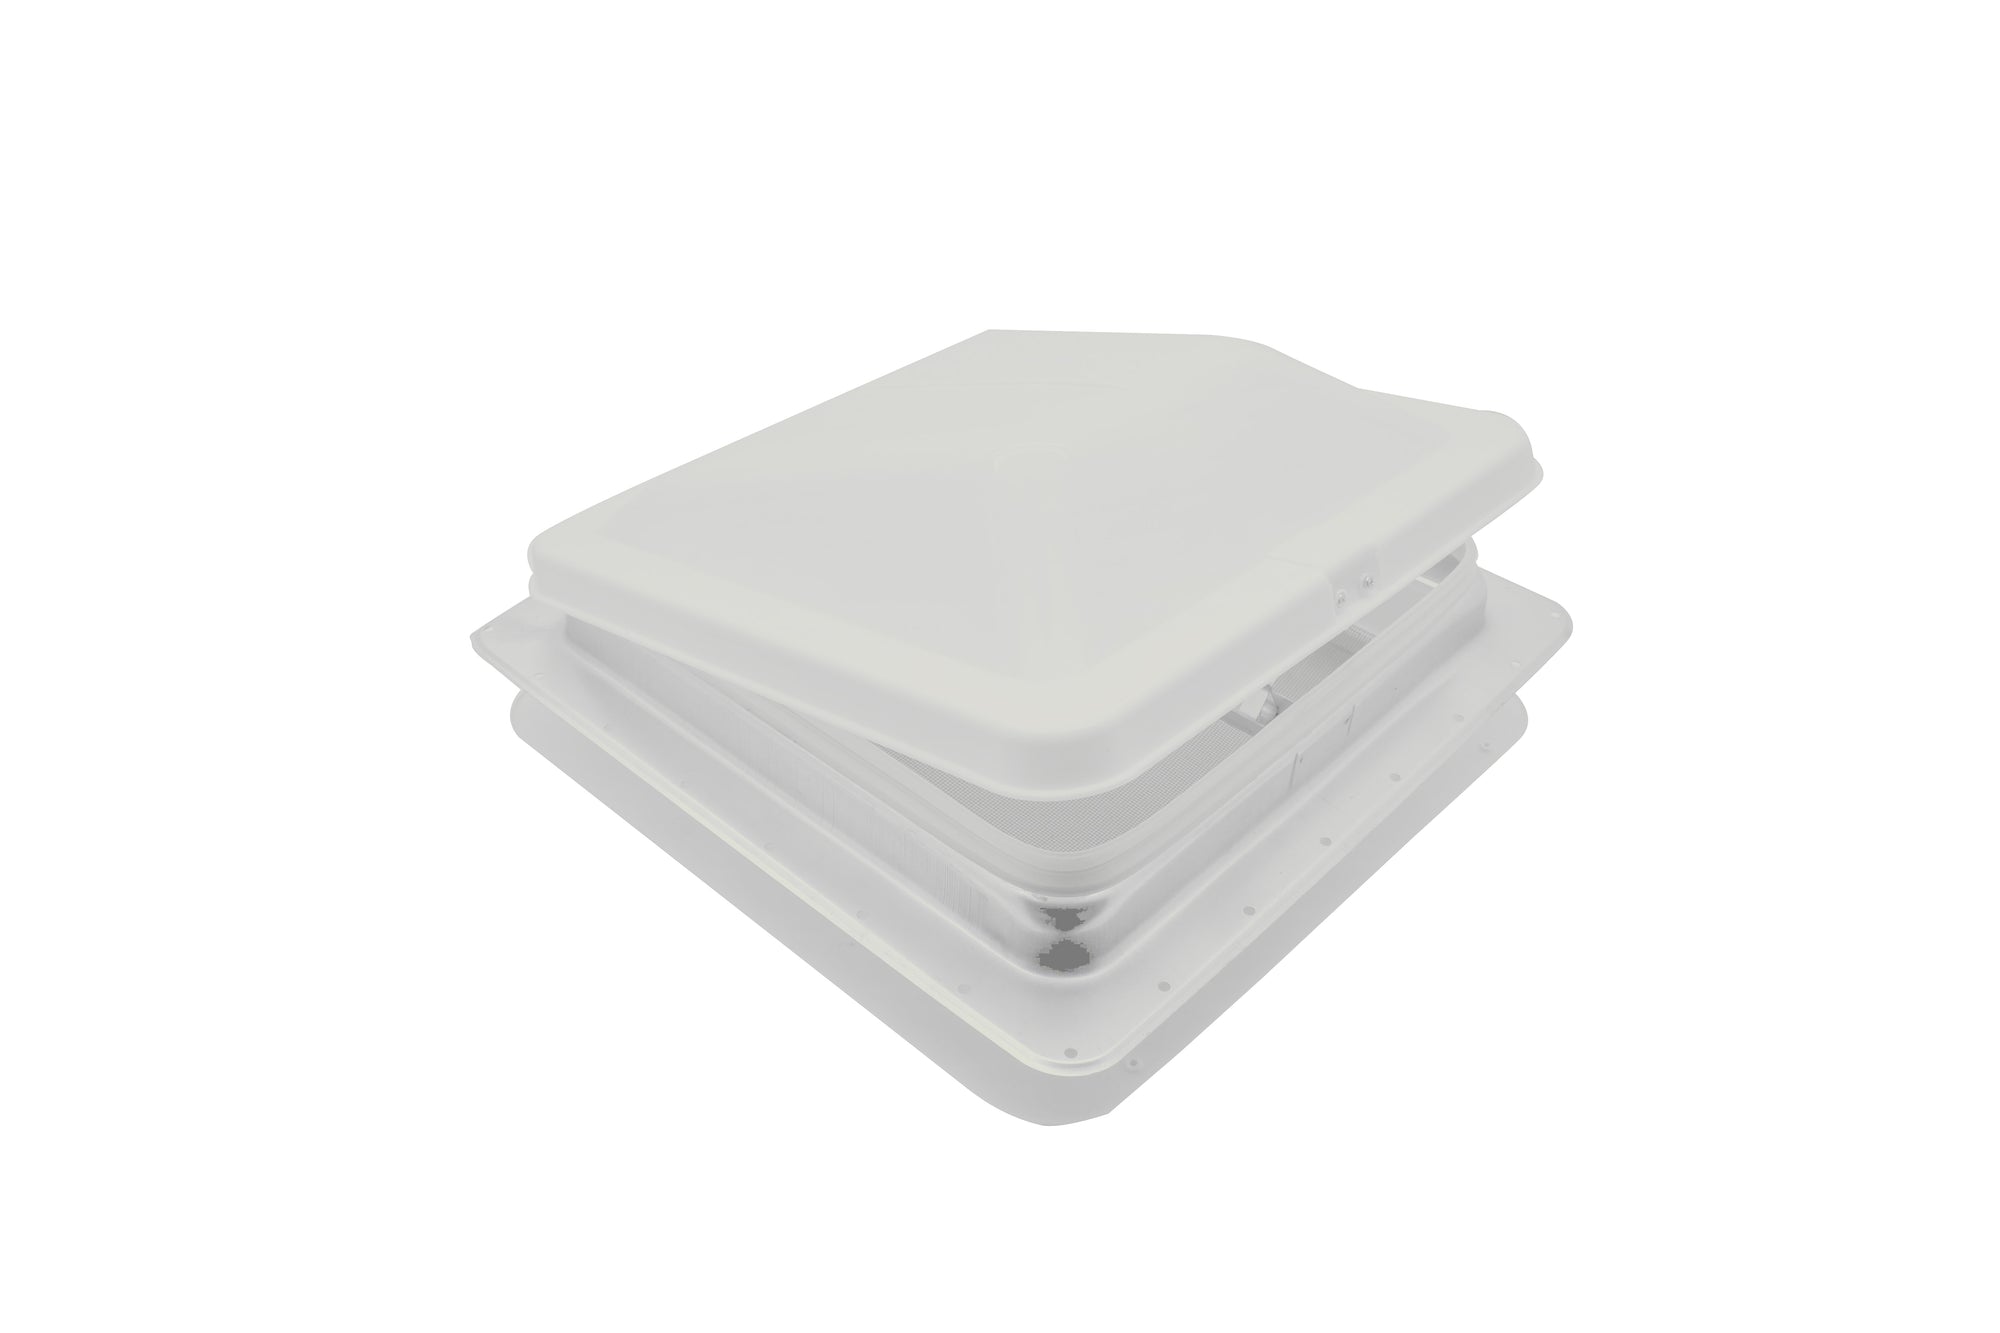 Heng's 71111A-C1G1 Universal Roof Vent Non-Powered with Exchange Lid - 14" White